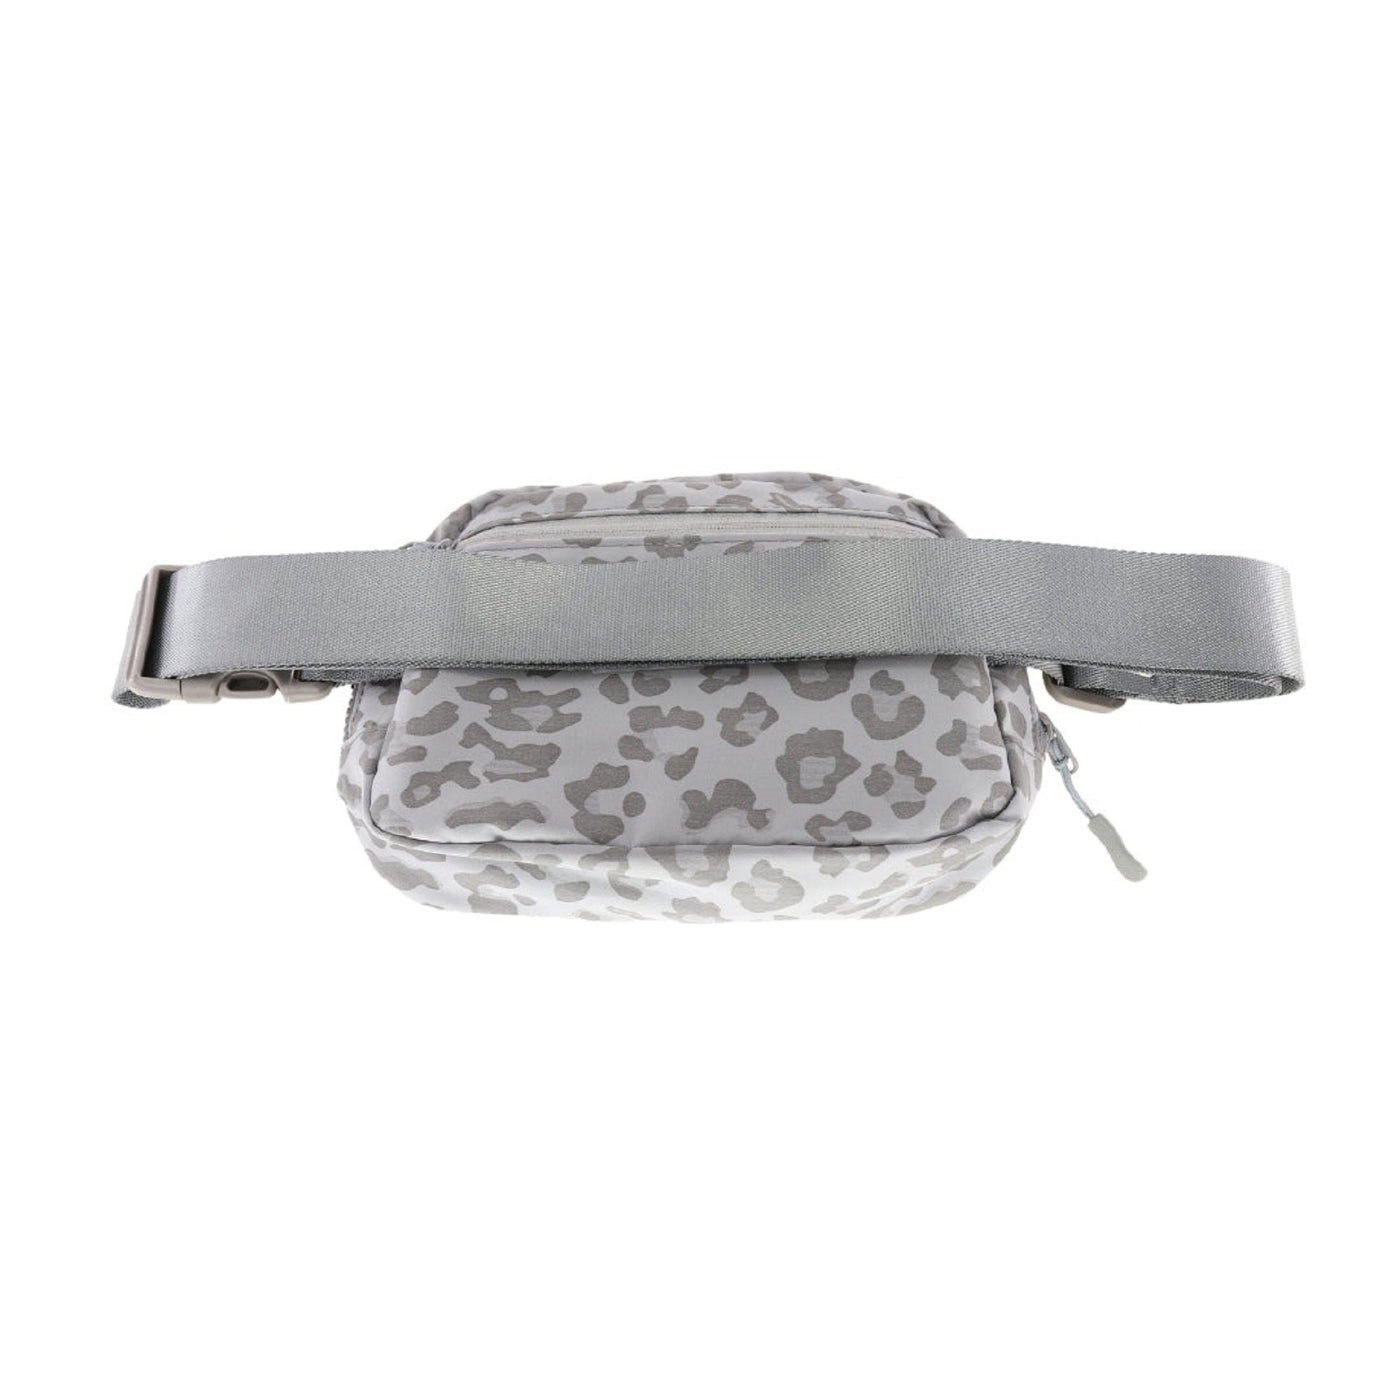 BGS4255 Leopard Fanny Pack - Honeytote